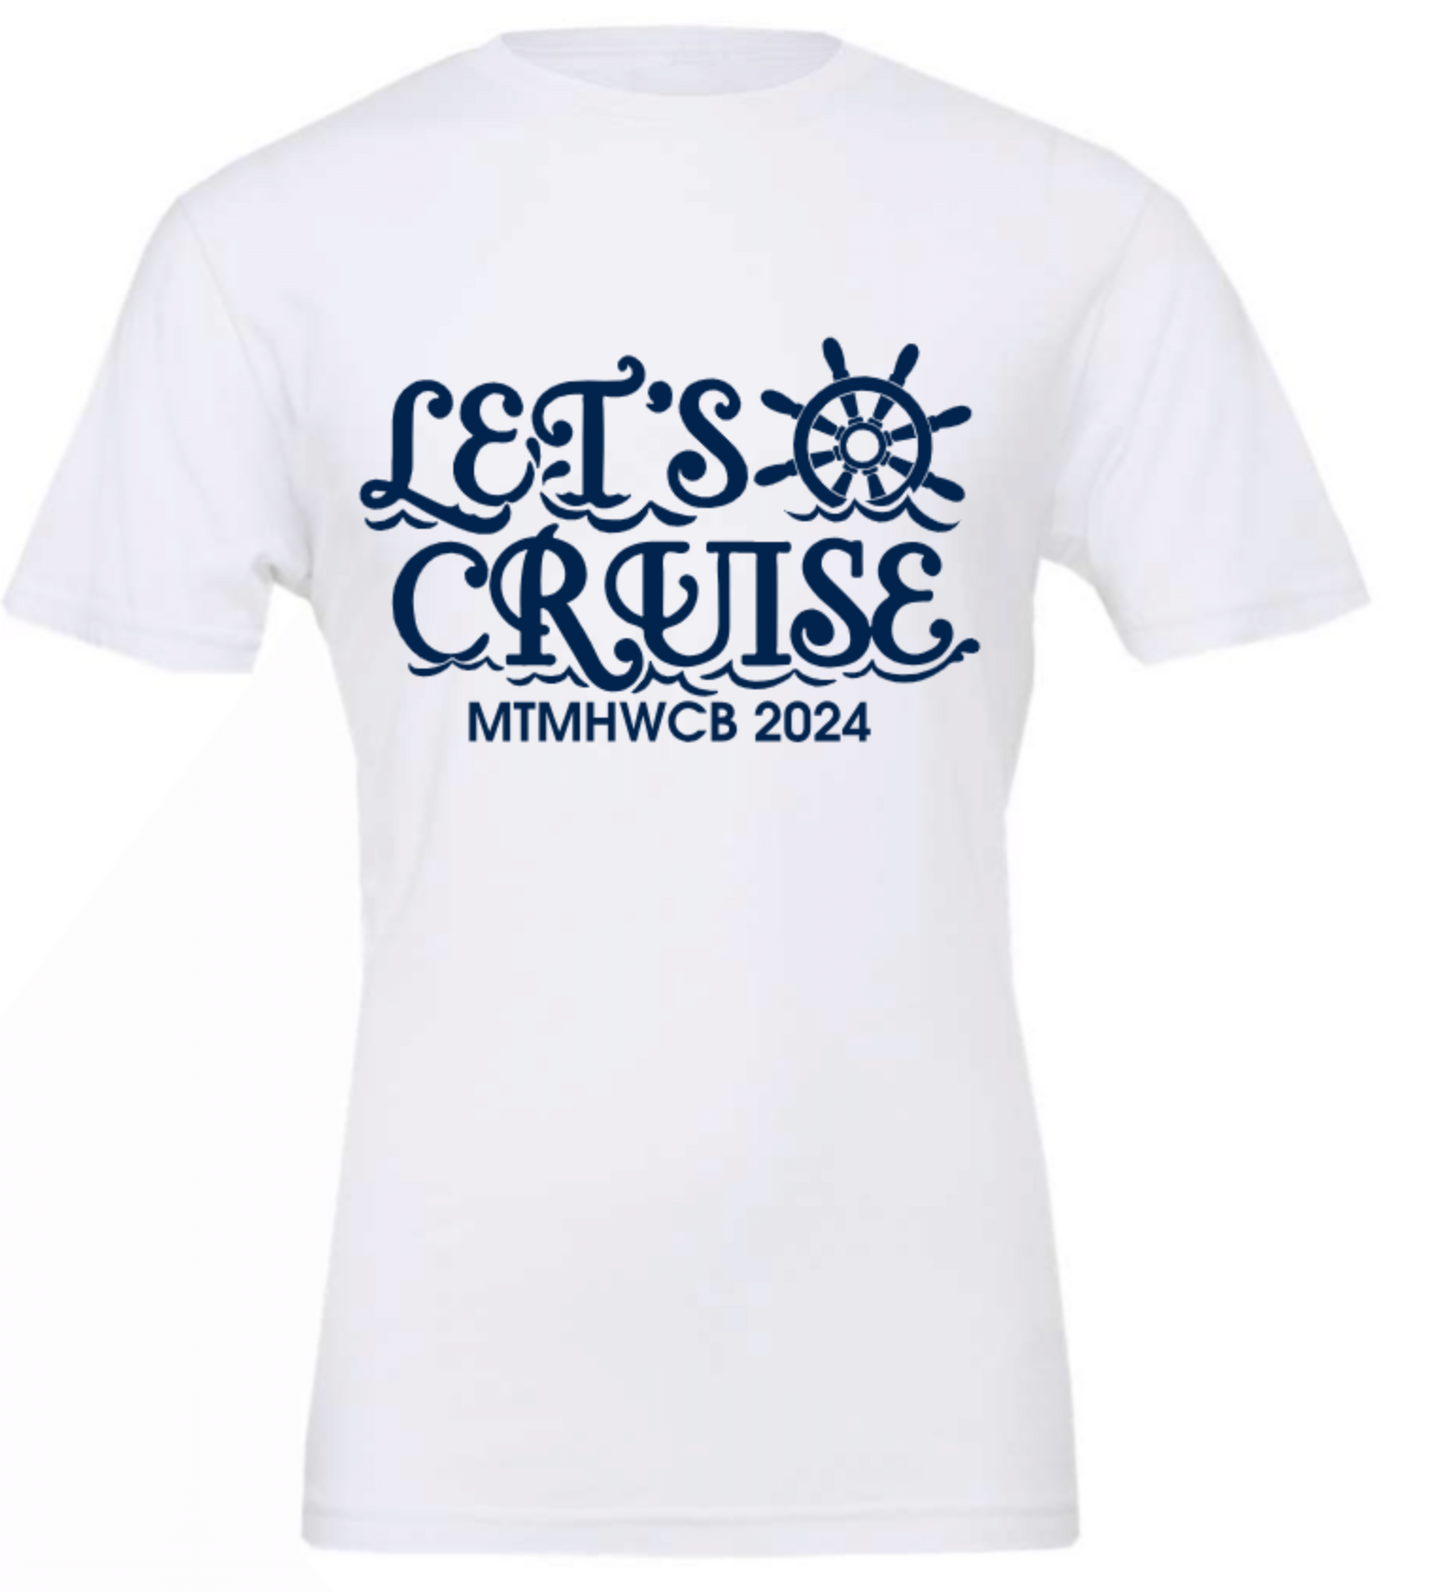 LET'S CRUISE MTMHWCB 2024